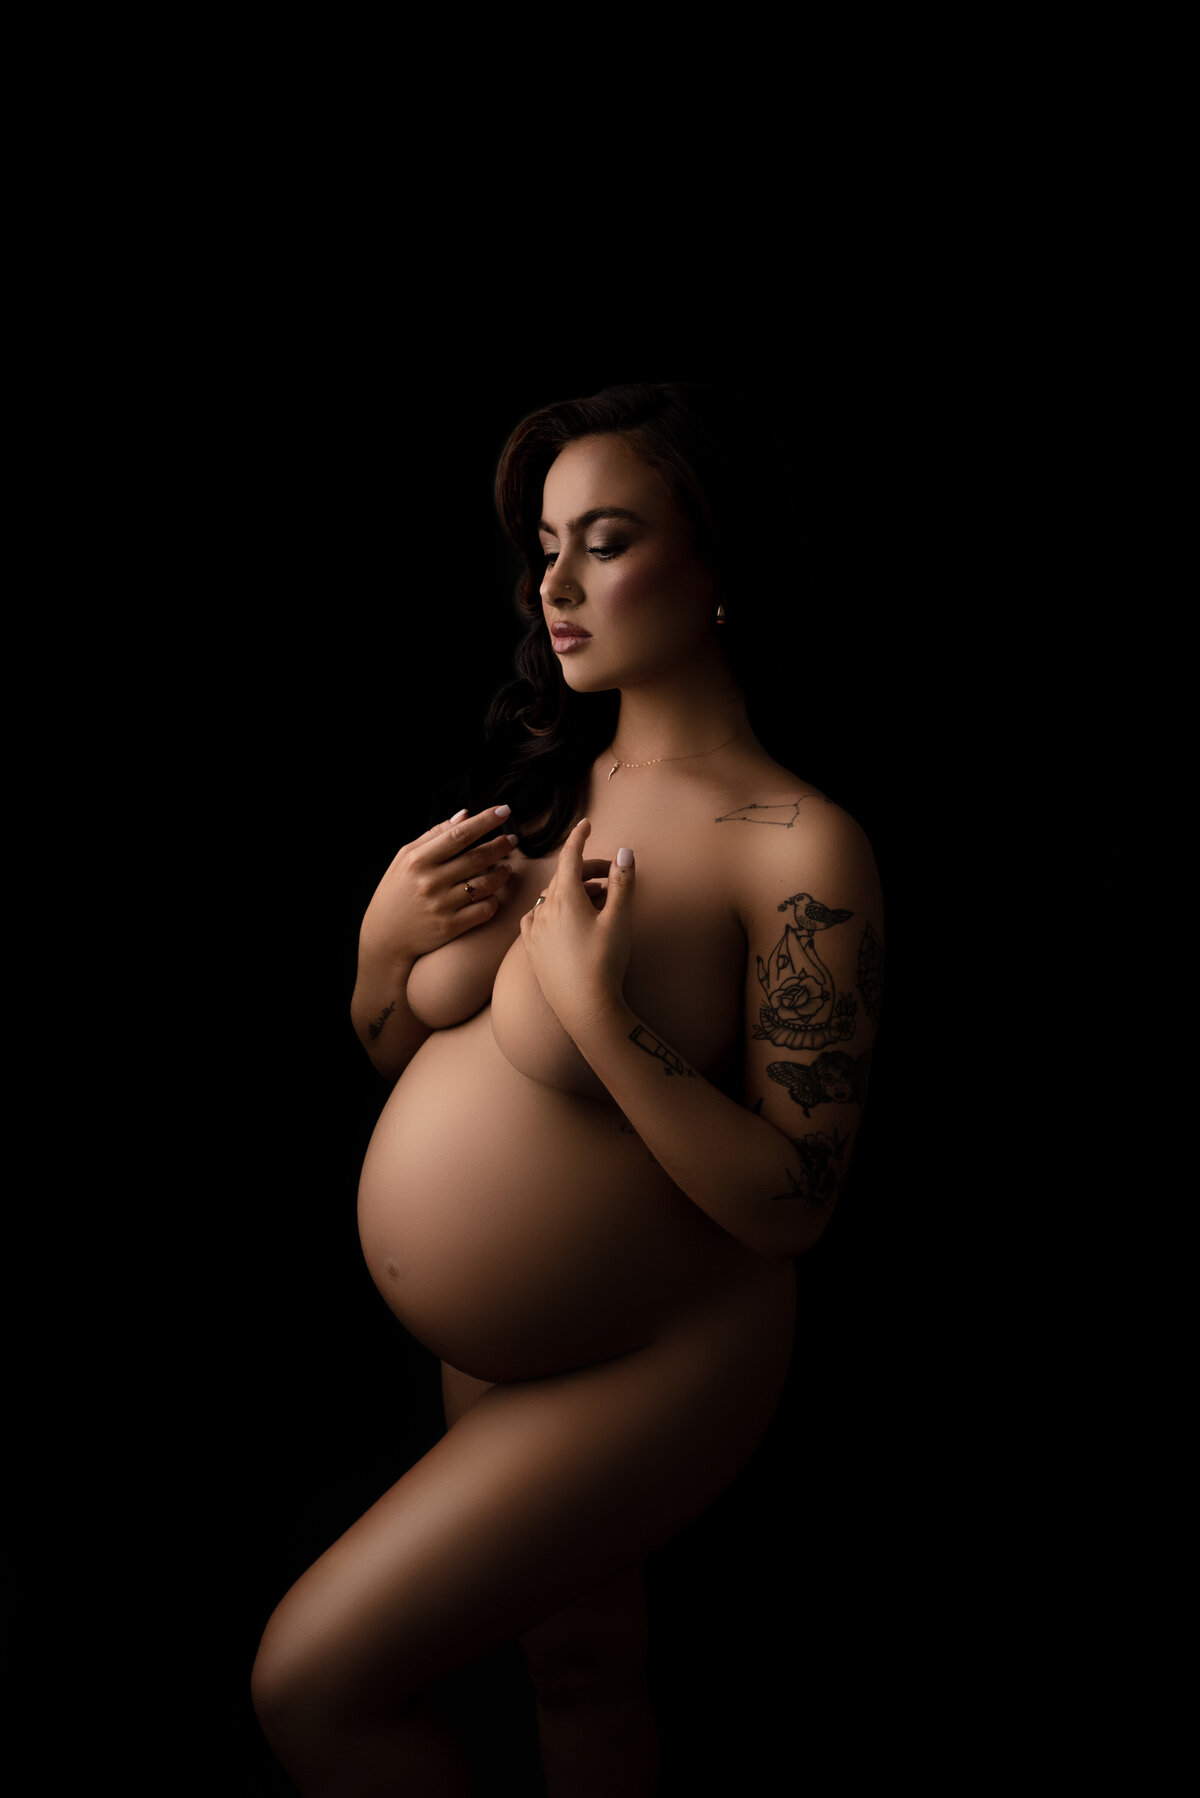 In this captivating maternity photo, expertly crafted by Katie Marshall, Philadelphia Main Line's premier maternity photographer, a bare-skinned woman stands in an alluring profile pose. Her hands artfully conceal her breasts, while one knee is gracefully bent, showcasing her unique tattoos. The play of dark shadows and subtle highlights masterfully accentuates her silhouette. This striking image celebrates the beauty of motherhood and exemplifies the artistry of Katie Marshall, a renowned maternity photographer in the Philadelphia Main Line area.